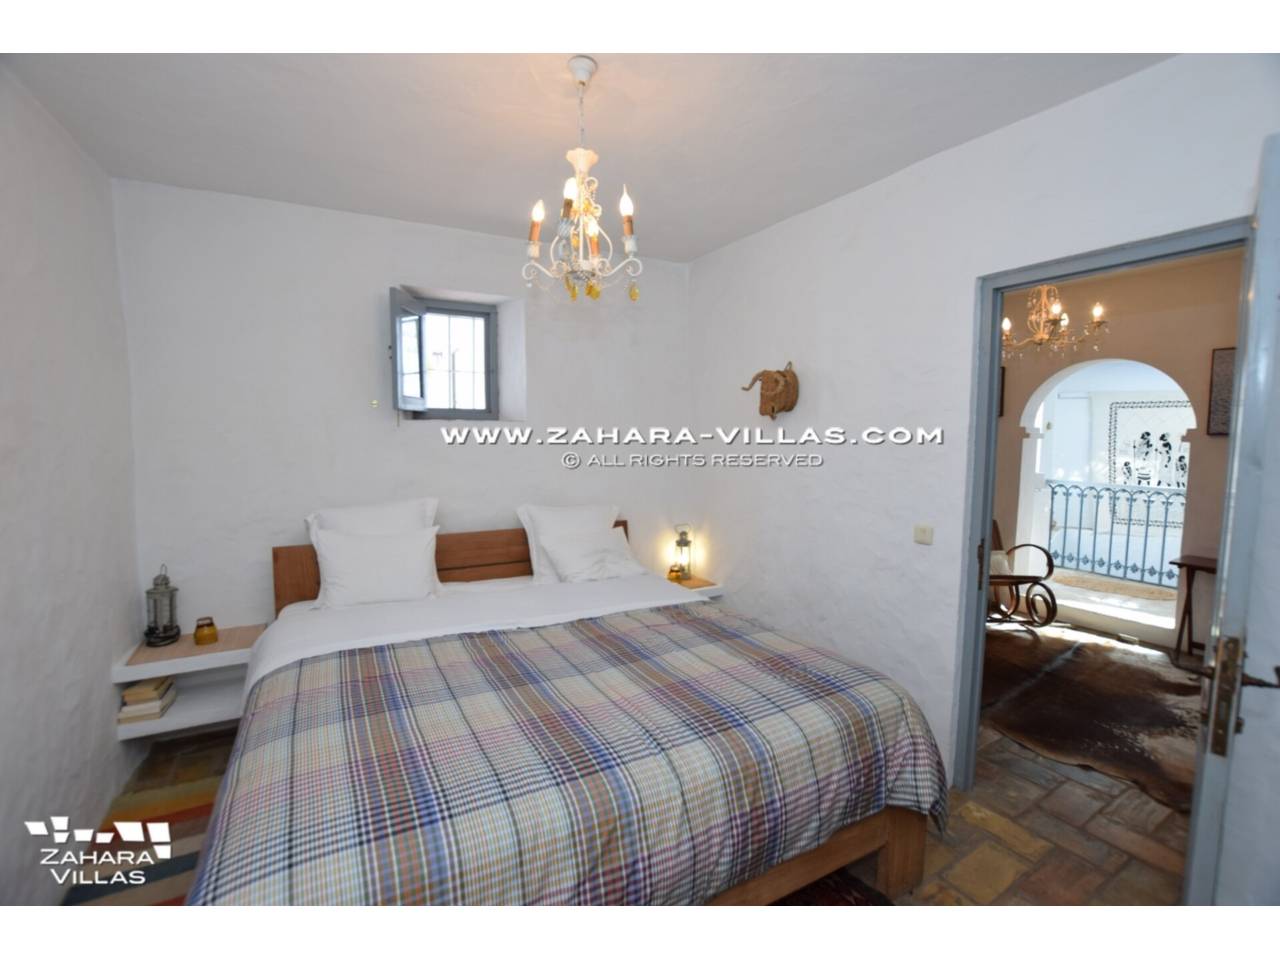 Imagen 46 de Magnificent House with central patio, in the historic center of the town